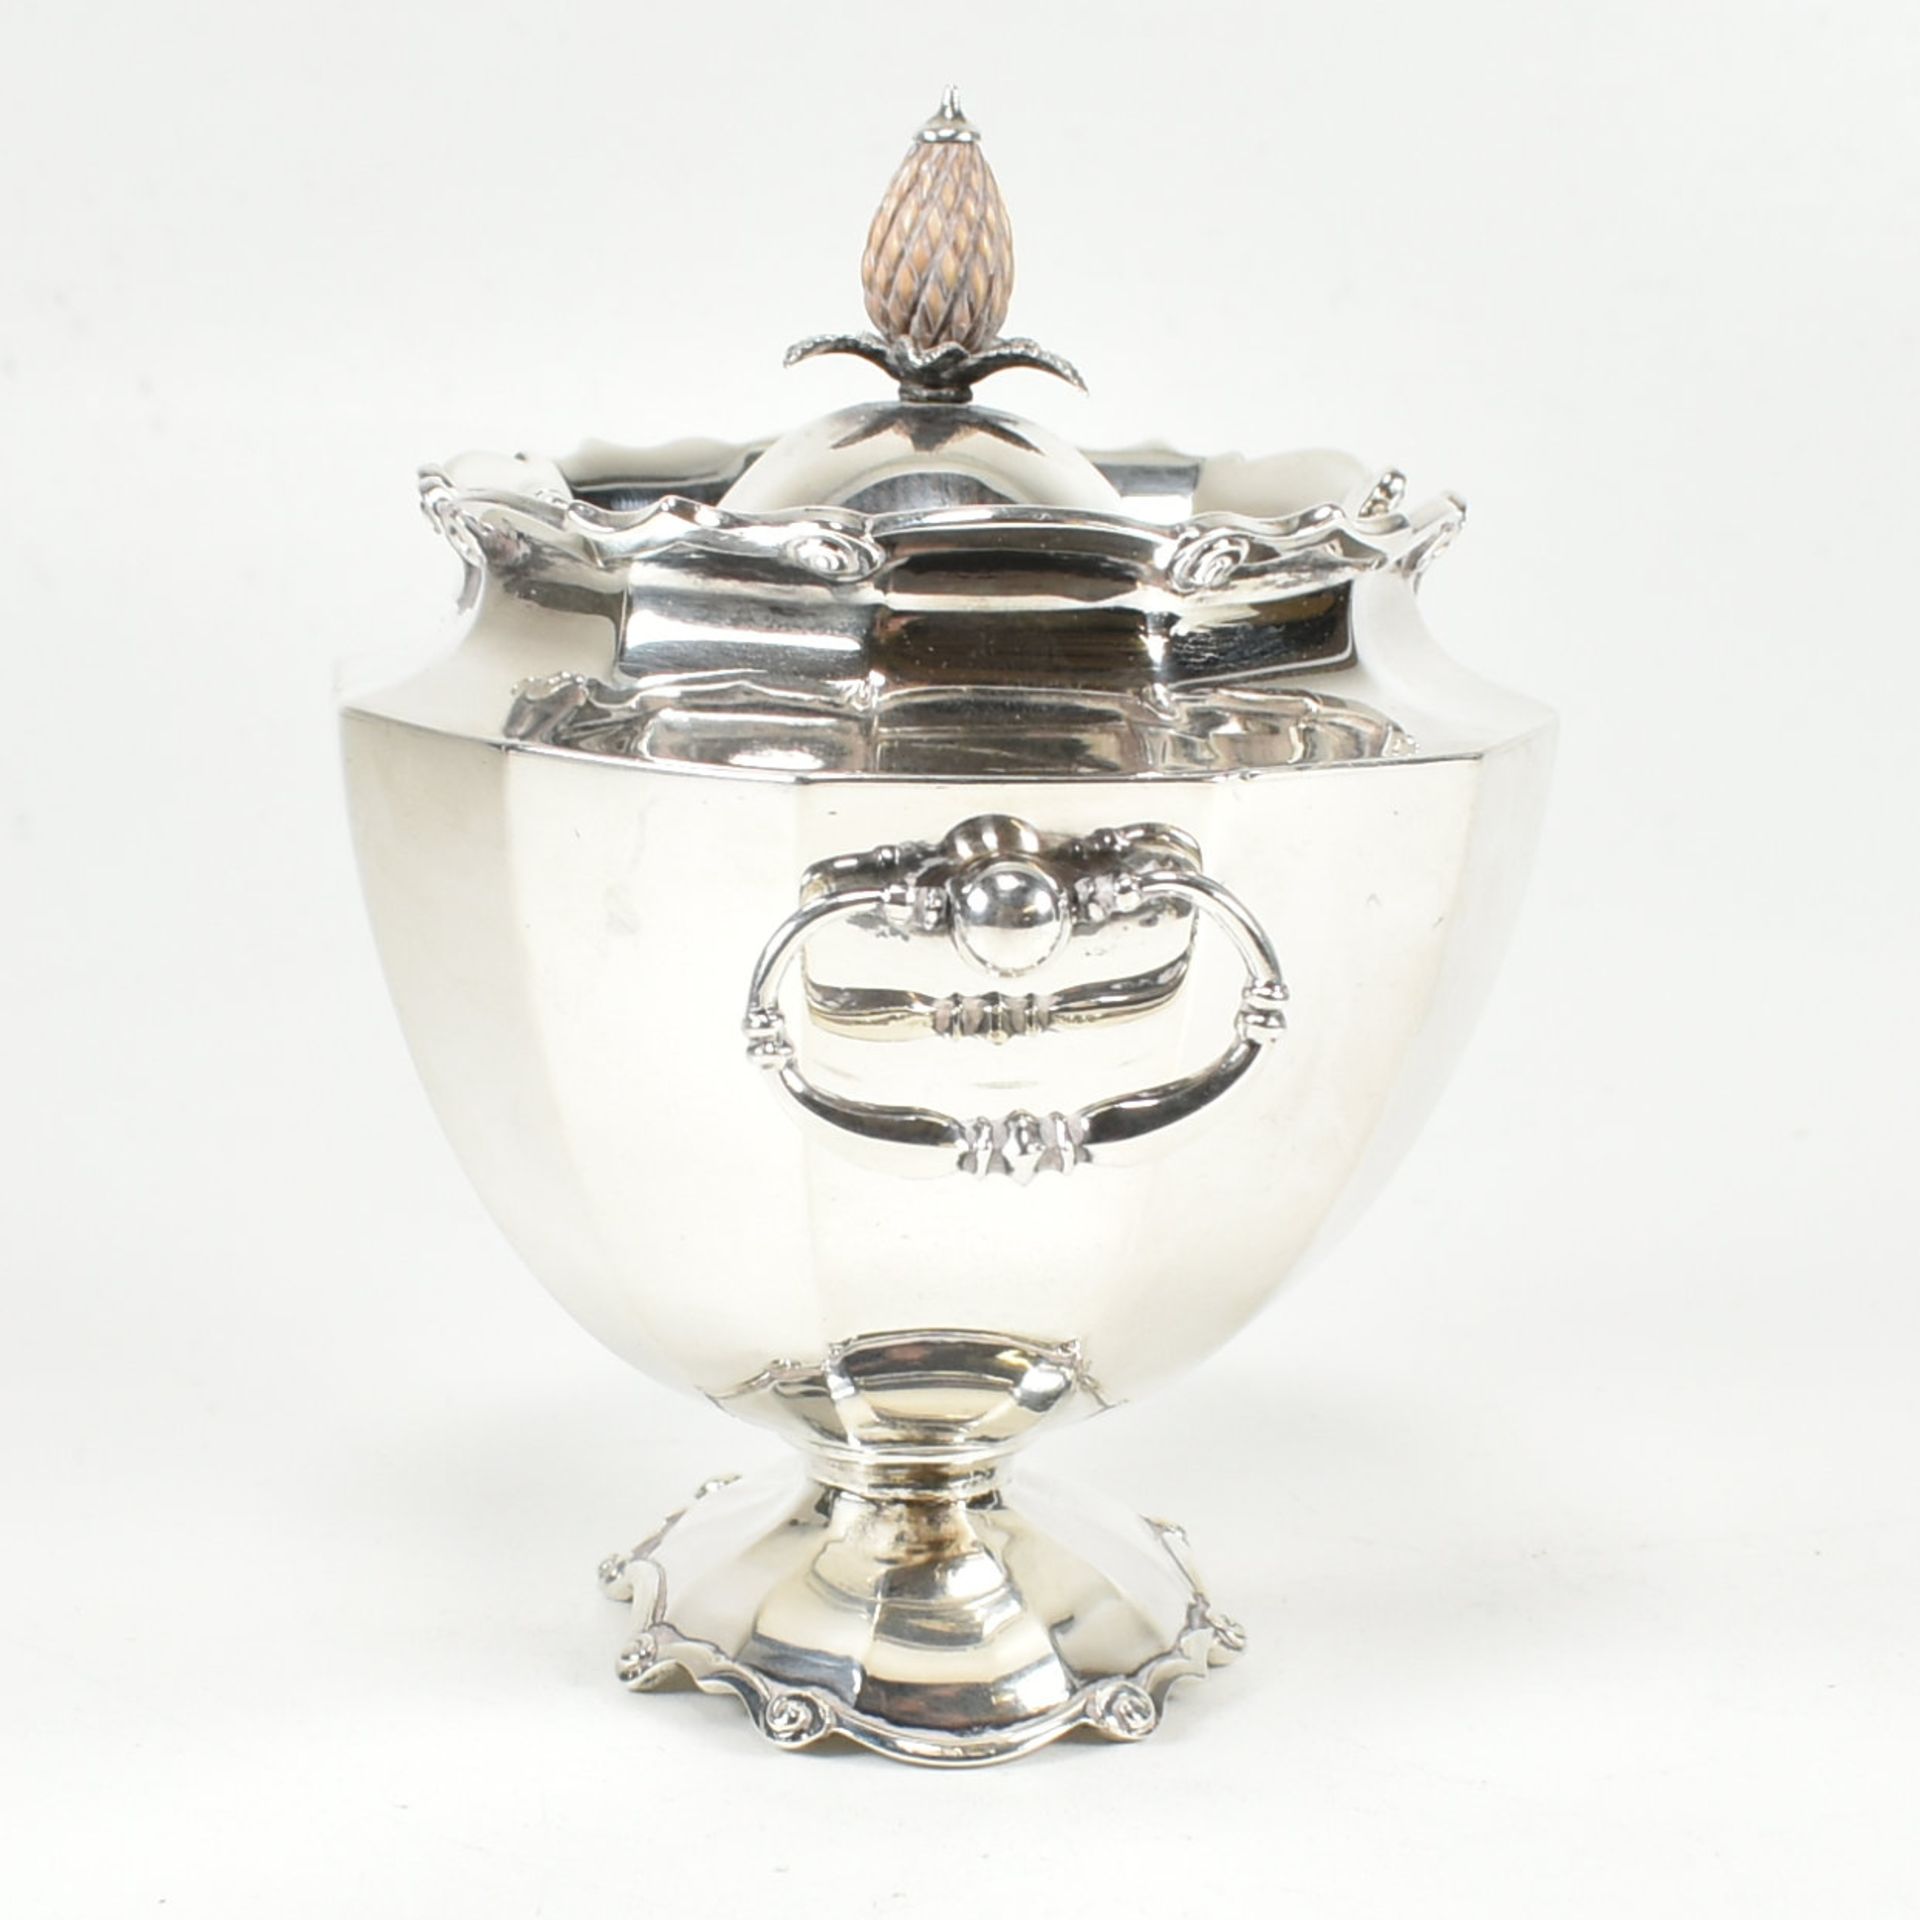 EARLY 20TH CENTURY HALLMARKED SILVER TEA CADDY - Image 6 of 8